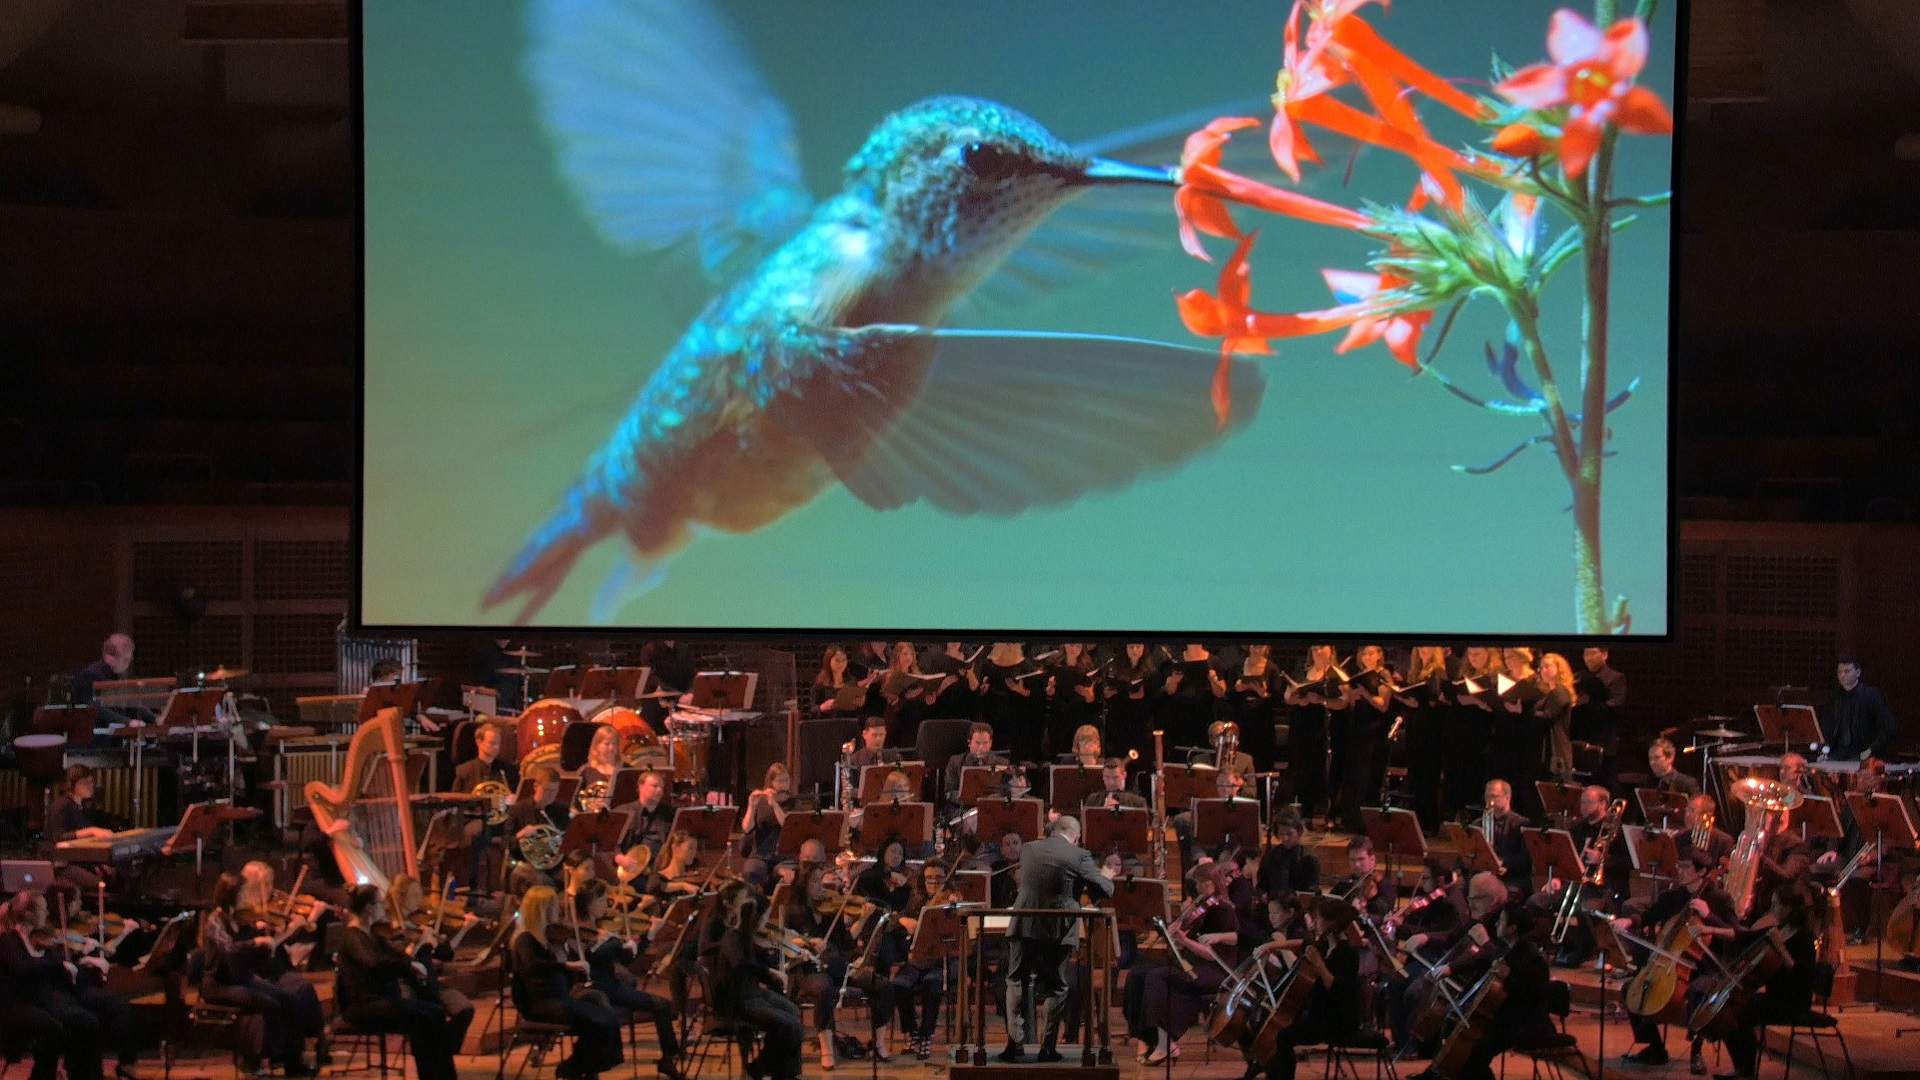 A Concert Series Pairing National Geographic Footage with a Live Orchestra Is Touring Australia